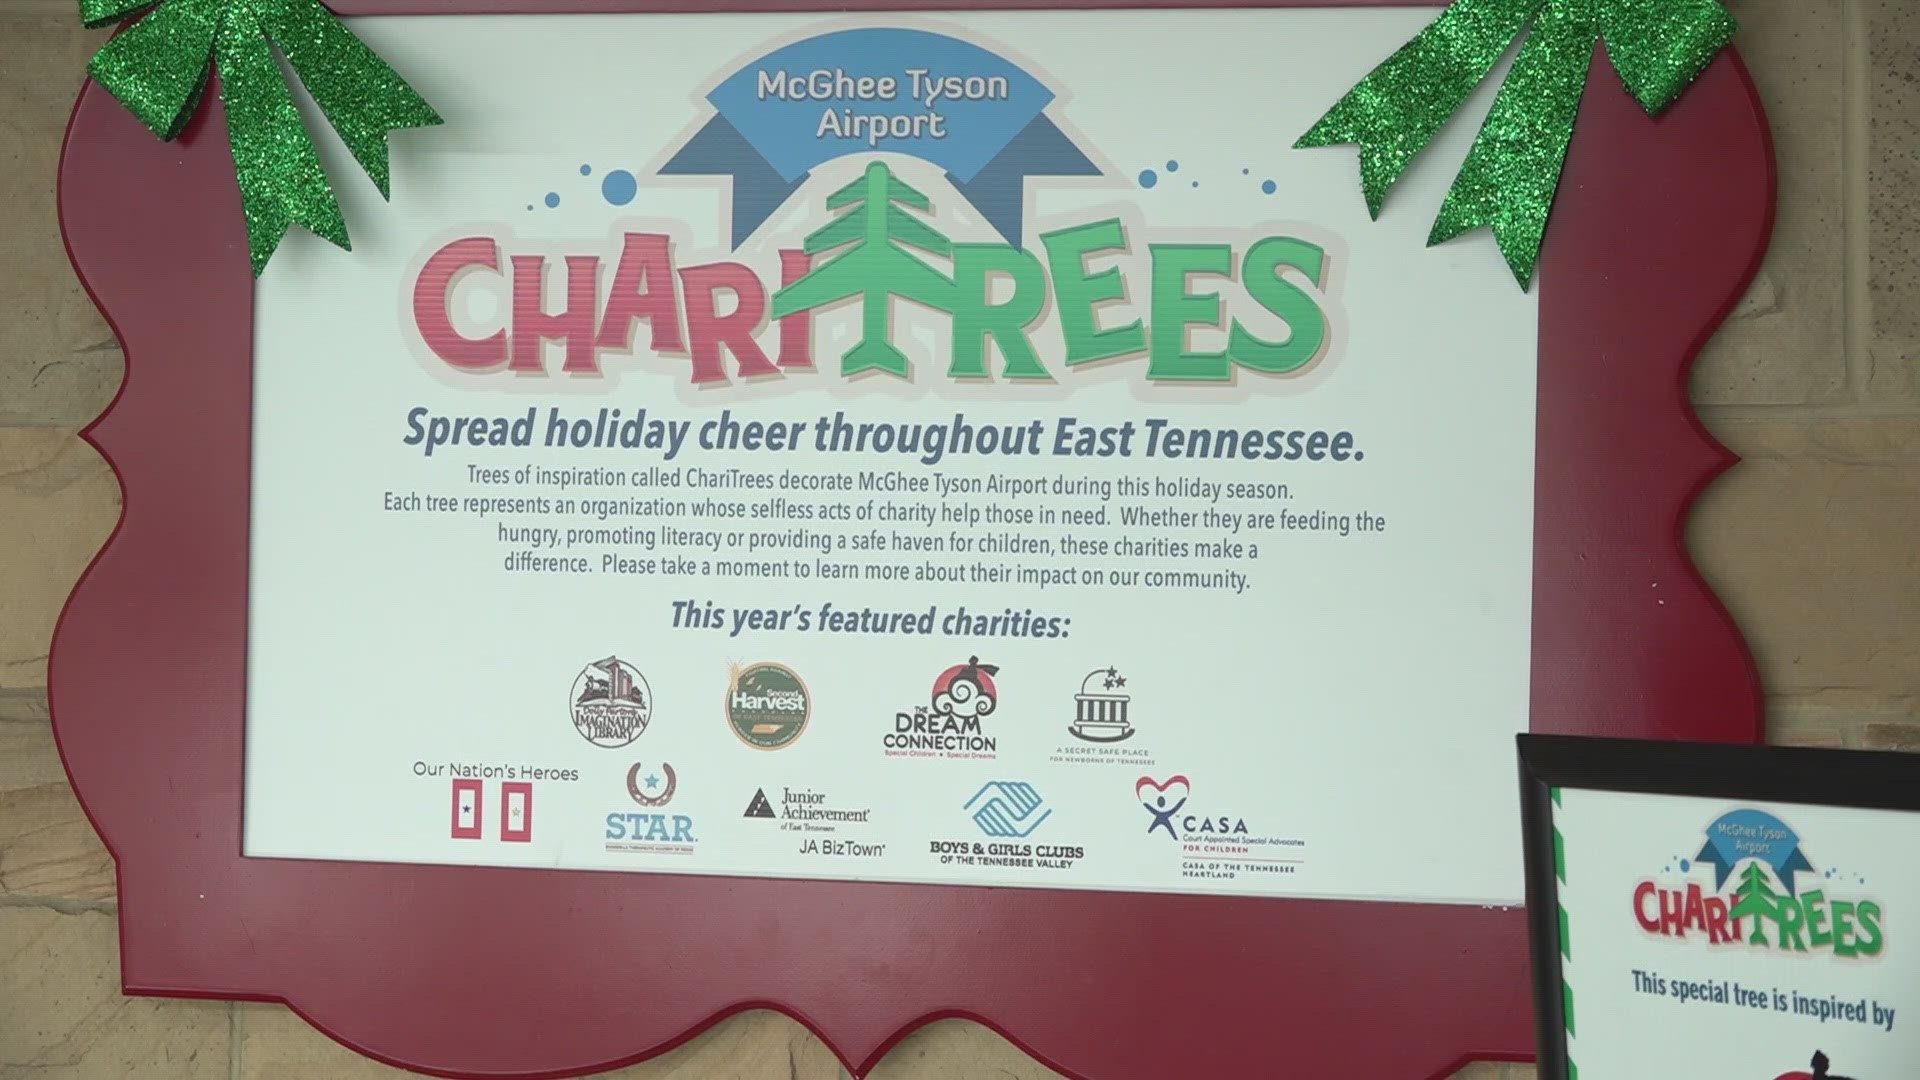 The "ChariTrees" program is raising awareness of the Imagination Library, Big Brothers Big Sisters of East Tennessee and several other nonprofits.